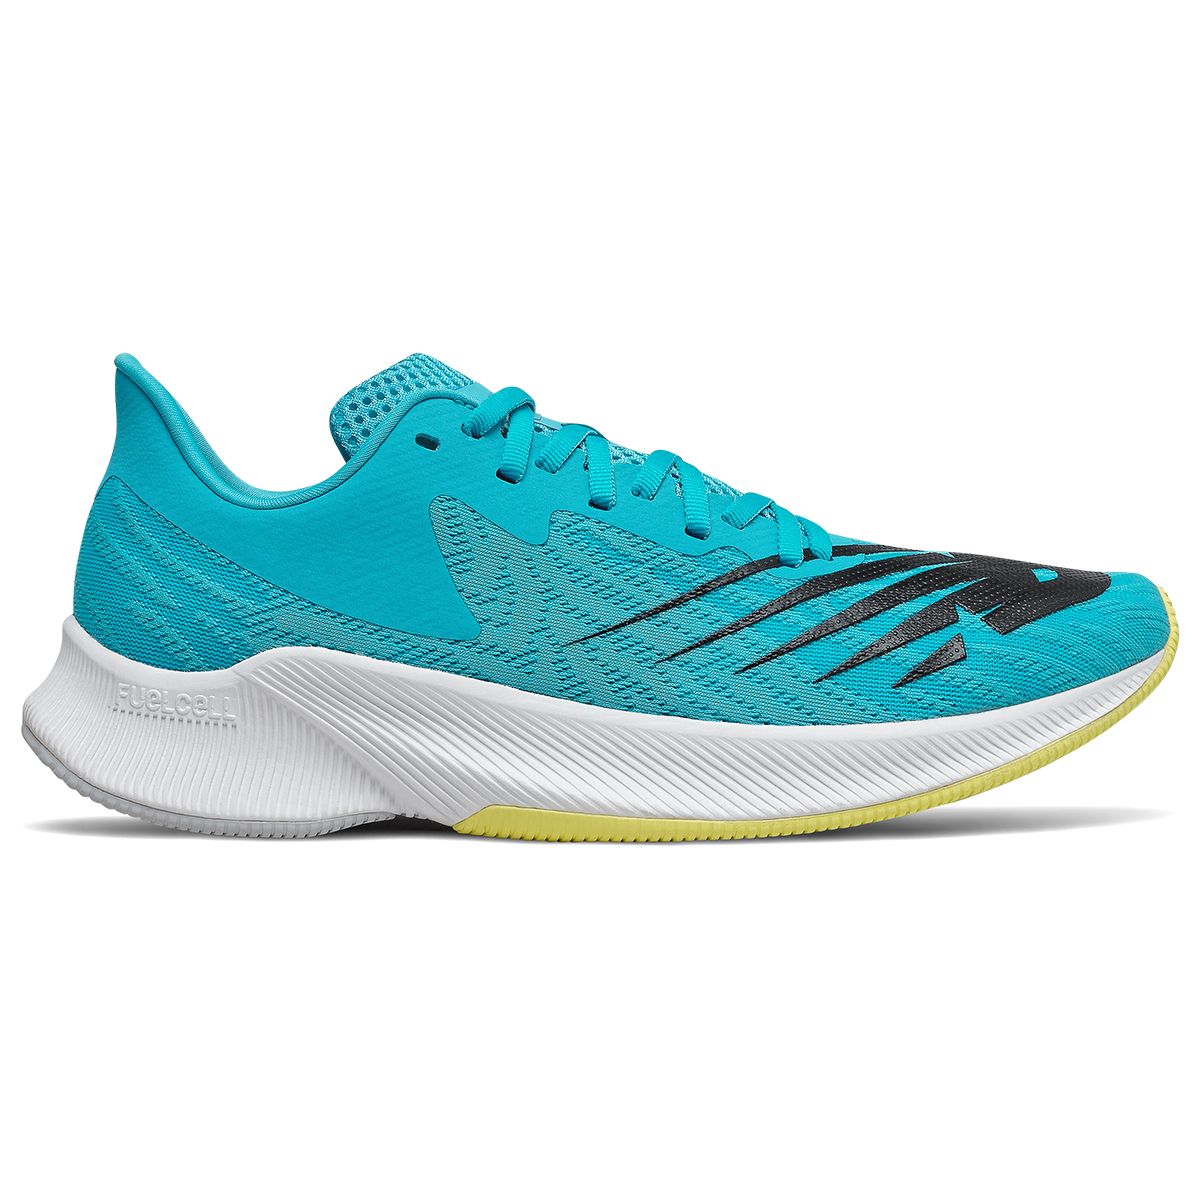 New Balance Men's Fuelcell Prism Virtual Sky Running Shoes